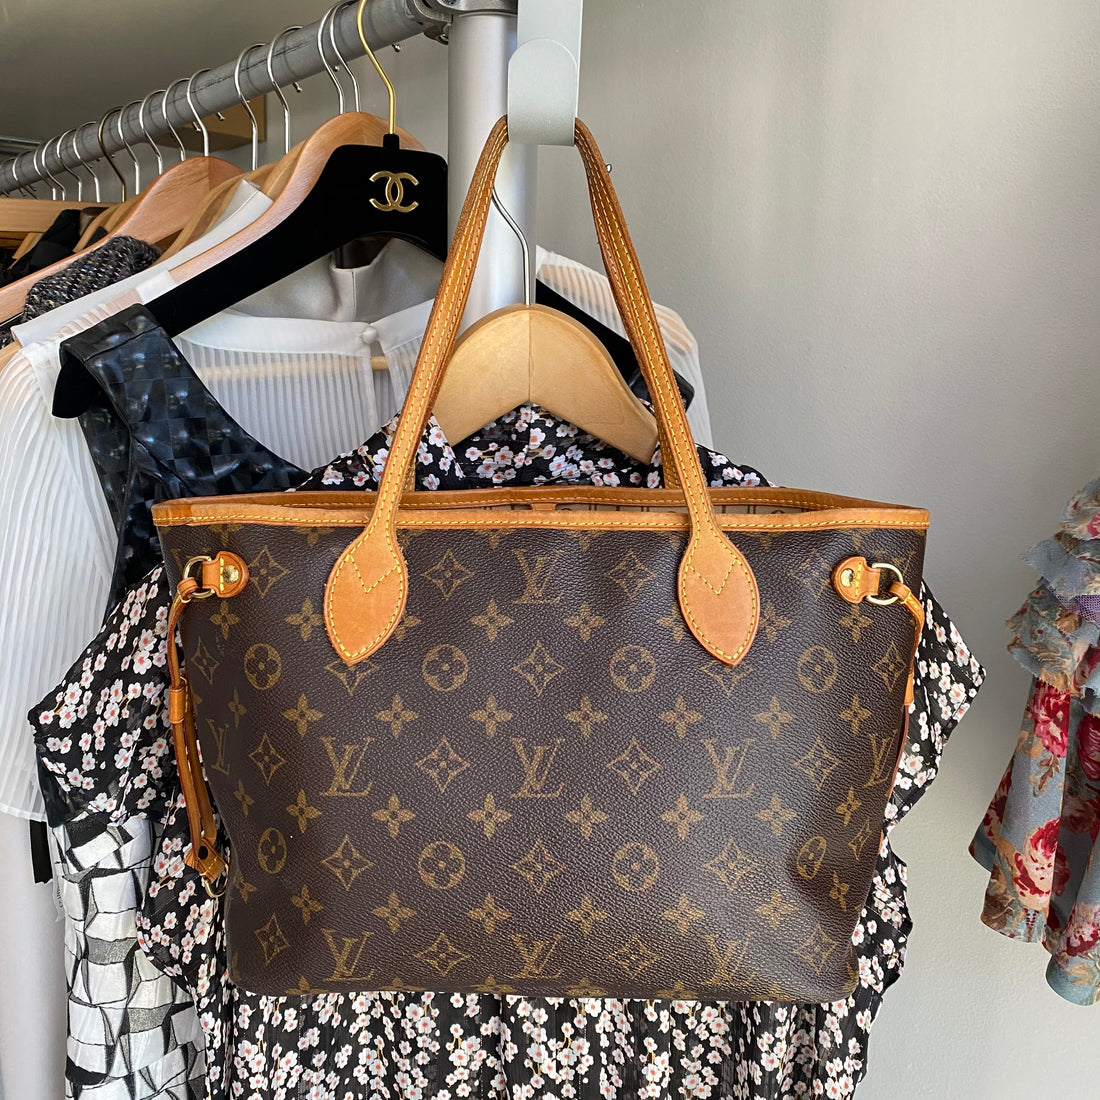 Louis Vuitton Monogram Canvas Neverfull PM Tote Bag – I MISS YOU